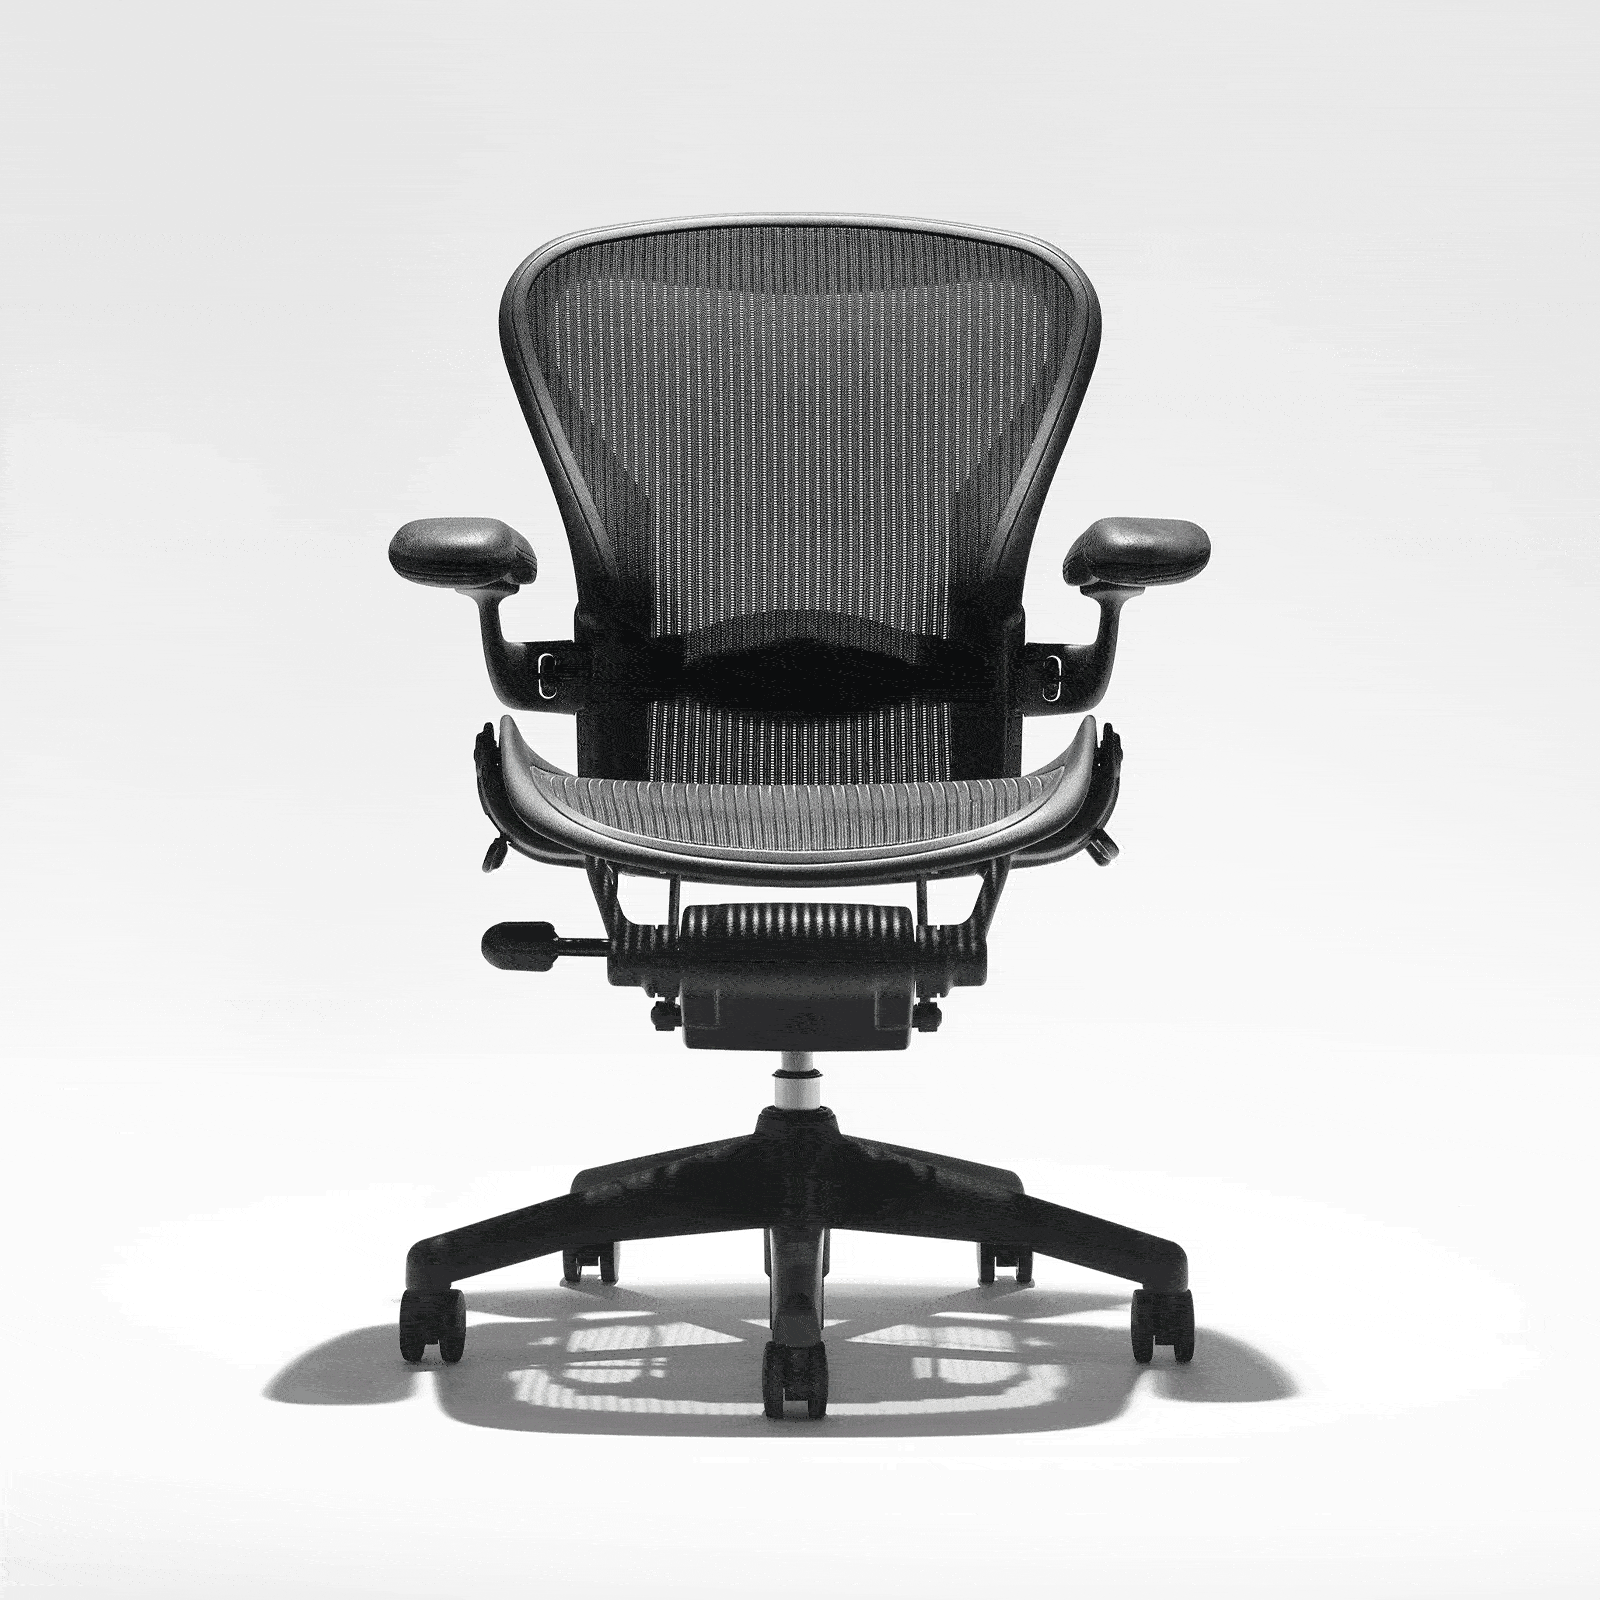 it_prd_ovw_aeron_chair_03.gif.rendition.1600.1600.png